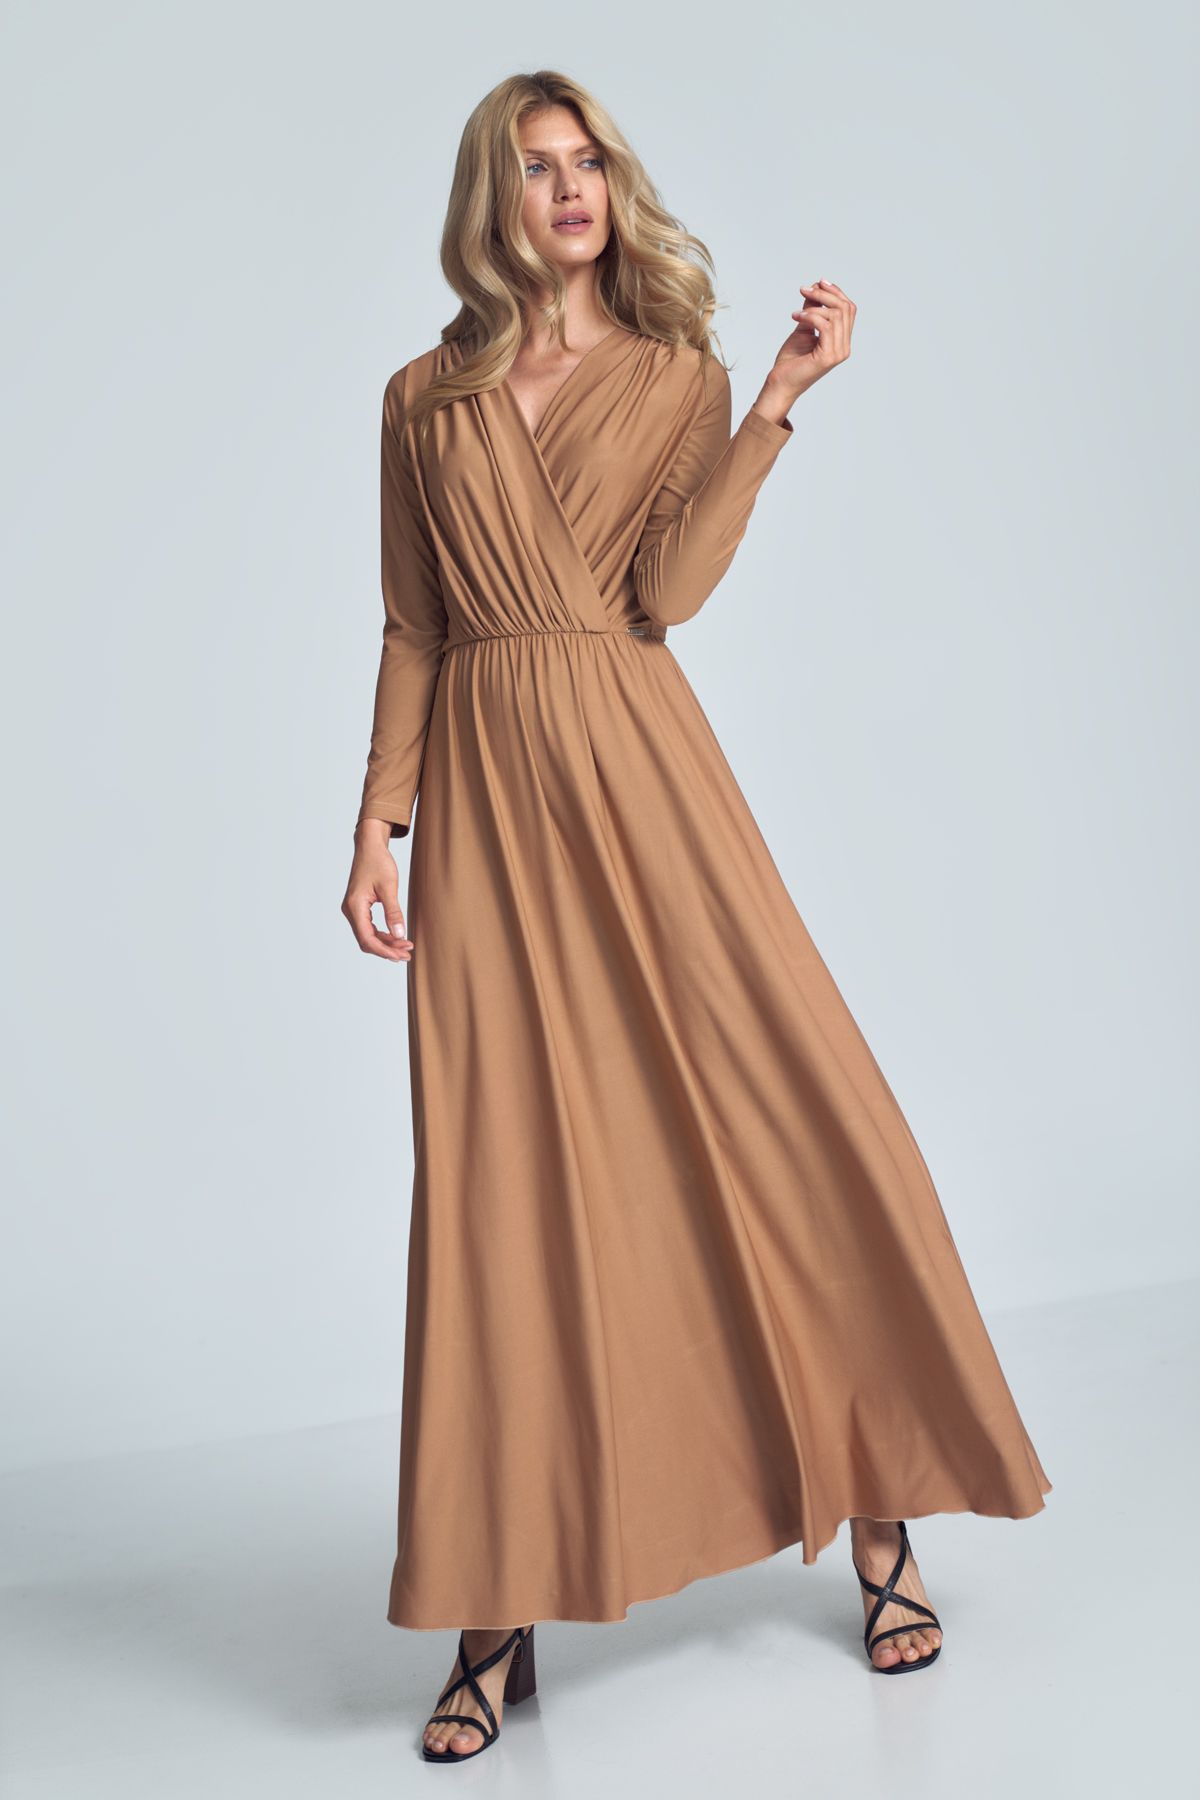 Beige maxi dress with long sleeves, wrap creased neckline, elasticated band sewn in the waist.